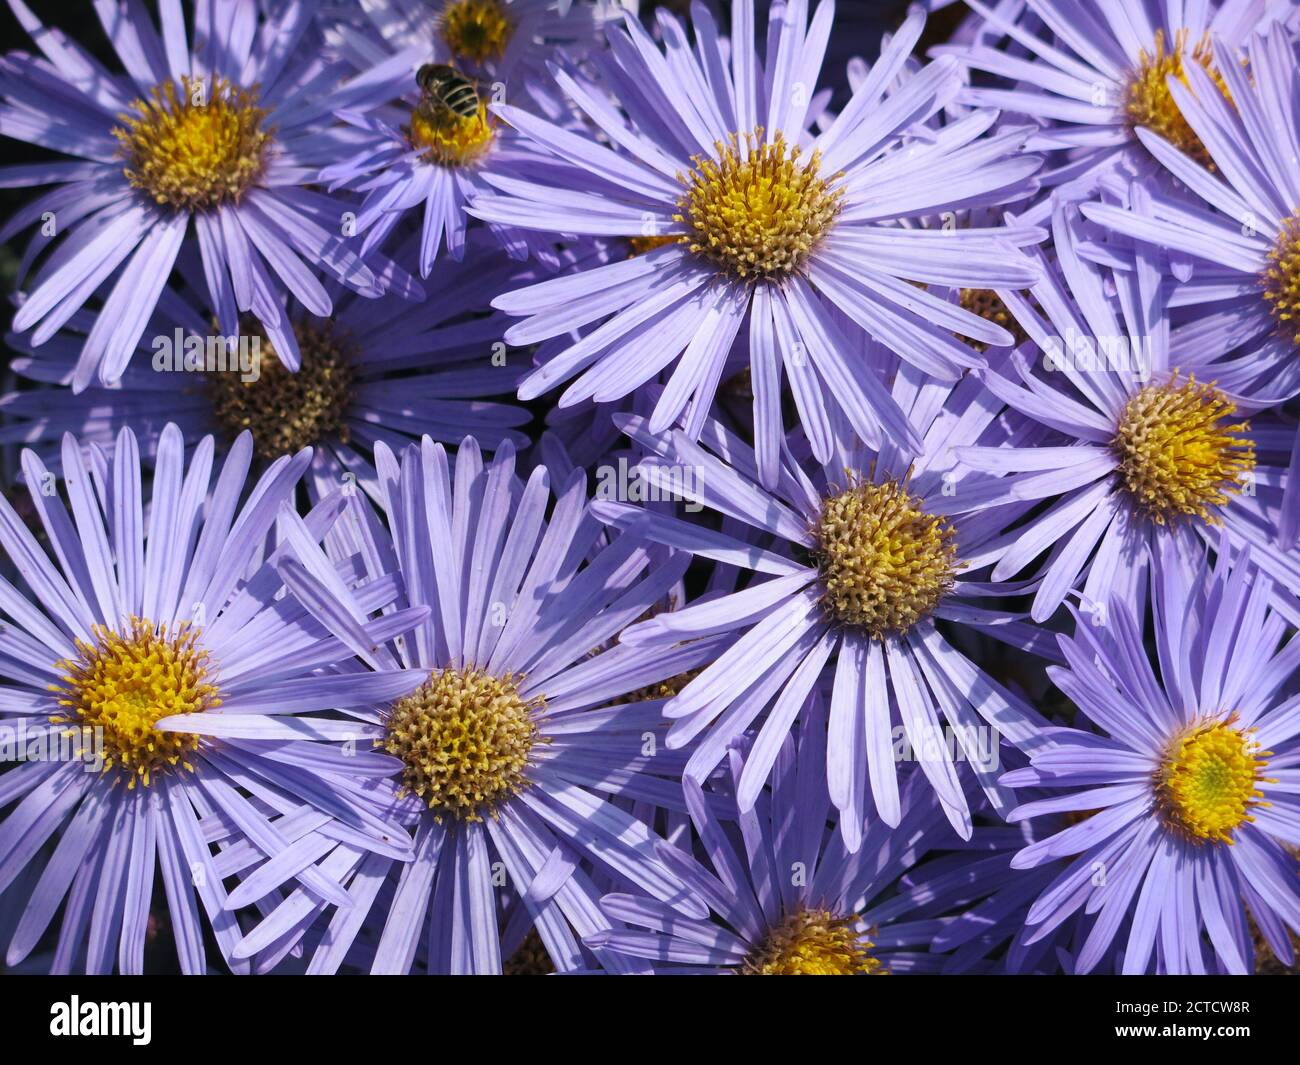 Close-up of the massed flower heads of vivid blue & yellow daisy-like flowers from aster amellus 'King George' also known as Michaelmas Daisies. Stock Photo